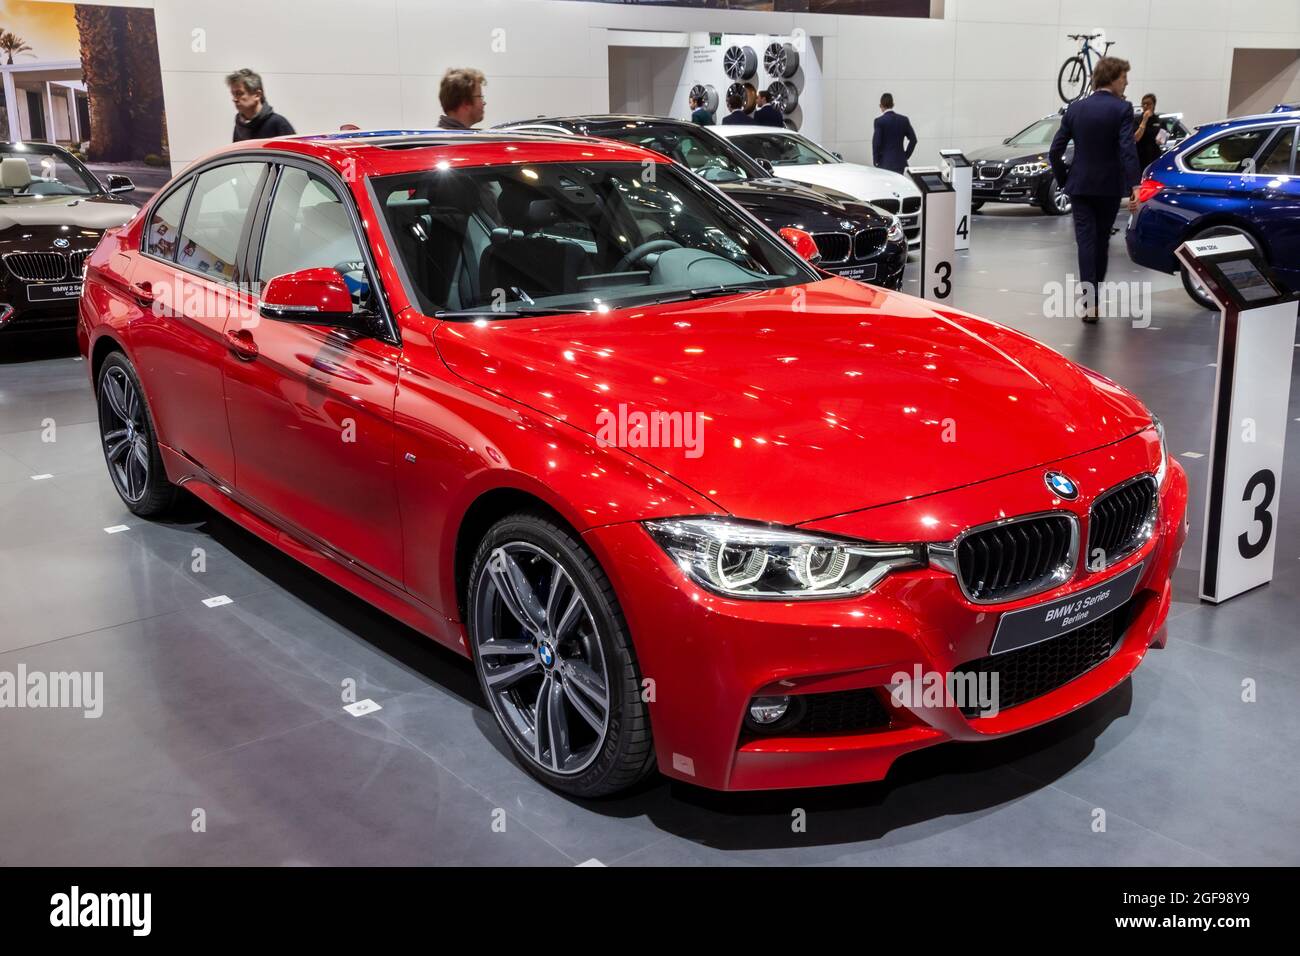 BMW 3 Series Berline car showcased at the Brussels Expo Autosalon motor show. Belgium - January 12, 2016 Stock Photo